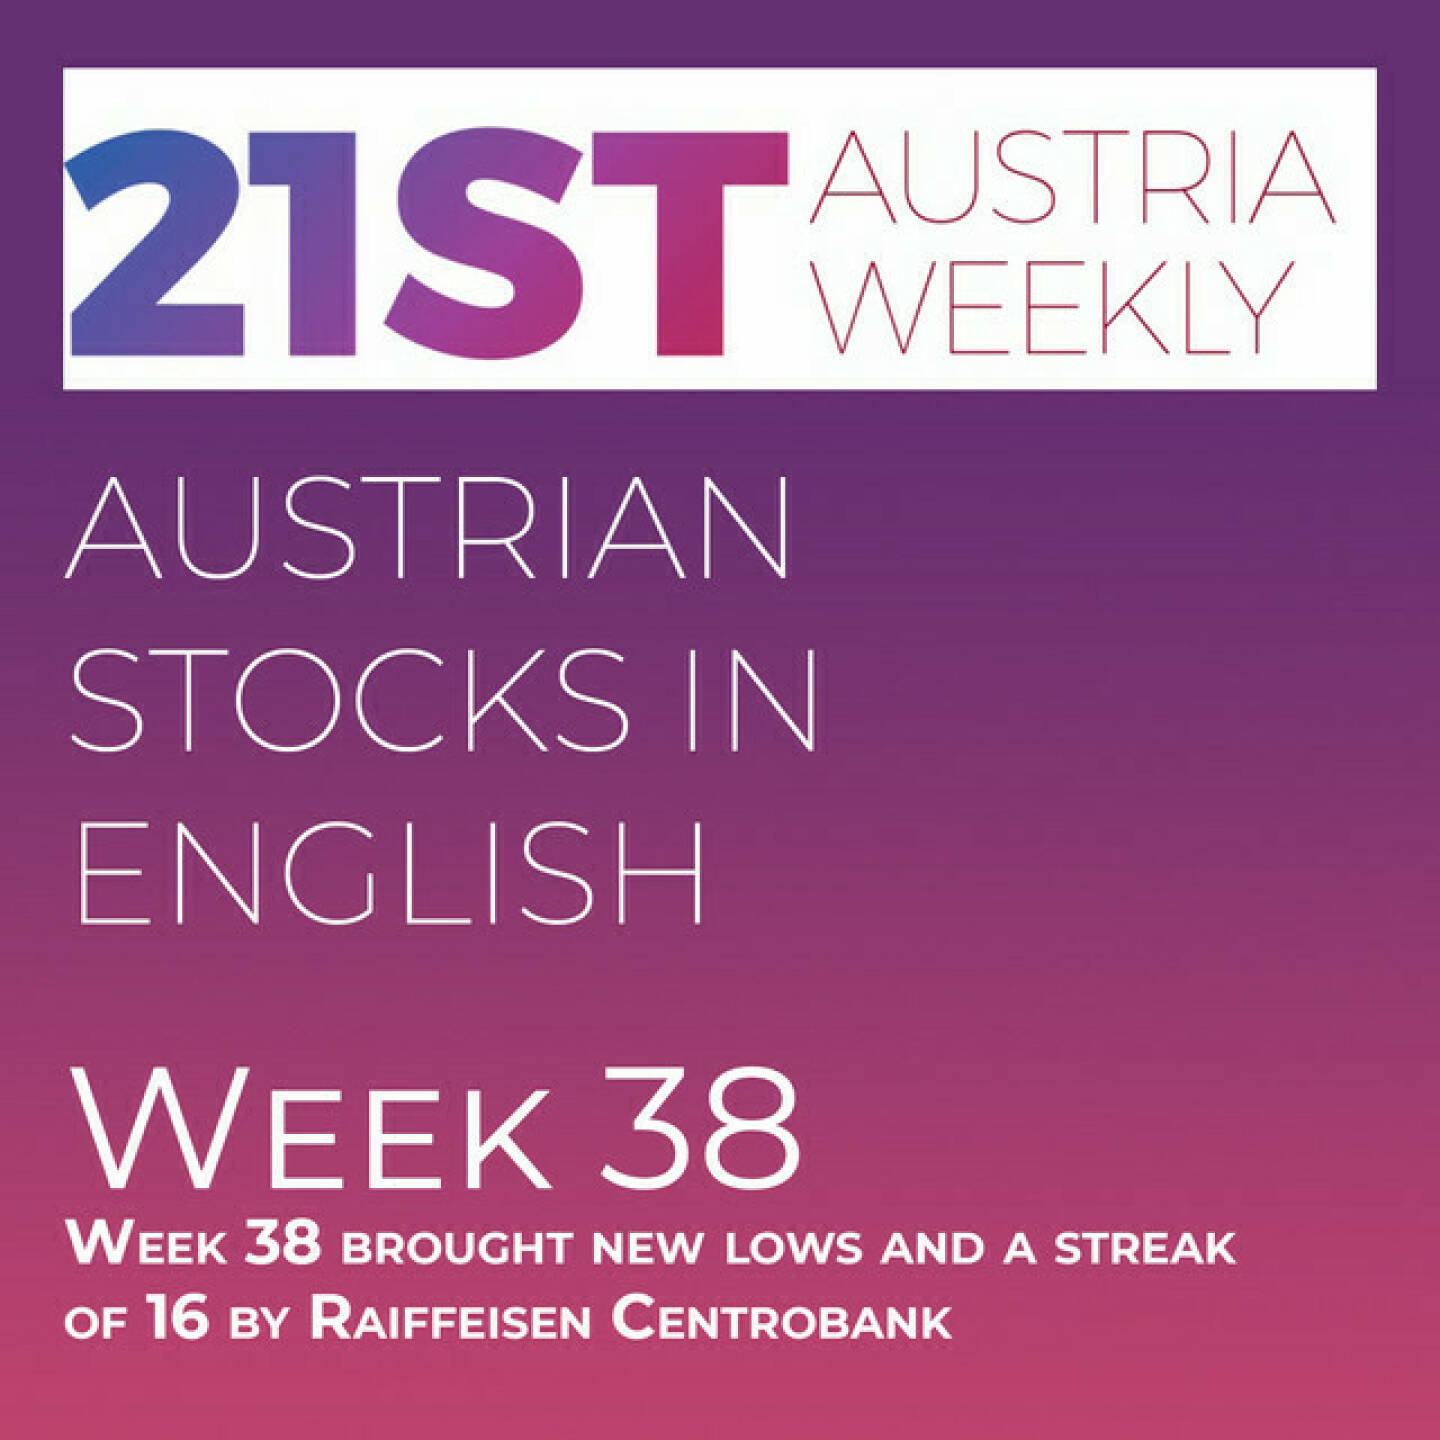 https://open.spotify.com/episode/5K4c6Ro3uNU78T974tL9jA
Austrian Stocks in English: Week 38 brought new lows and a streak of 16 by Raiffeisen Centrobank - <p>Welcome to &#34;Austrian Stocks in English - presented by Palfinger&#34;, the new and weekly english spoken Summary for the Austrian Stock Market, positioned every Sunday in the mostly german languaged Podcast &#34; Christian Drastil - Wiener Börse, Sport Musik und Mehr“  Week 38 was another brutal week for our ATX TR, which lost 6,28 percent and closed on Friday at 5763 points, a new low for 2022.  News came from Frequentis, Pierer Mobility (2), Lenzing, Immofinanz, Andritz, Wienerberger, Agrana, Wolftank and OMV. And: For the 16th time in a row, Raiffeisen Centrobank was the overall winner of the annual Certificates Award Austria. <br/>Next week starts our 13th Stock Market Tournament with the Qualifying, adding our new Partner Amag and Aventa to the Roster.</p>